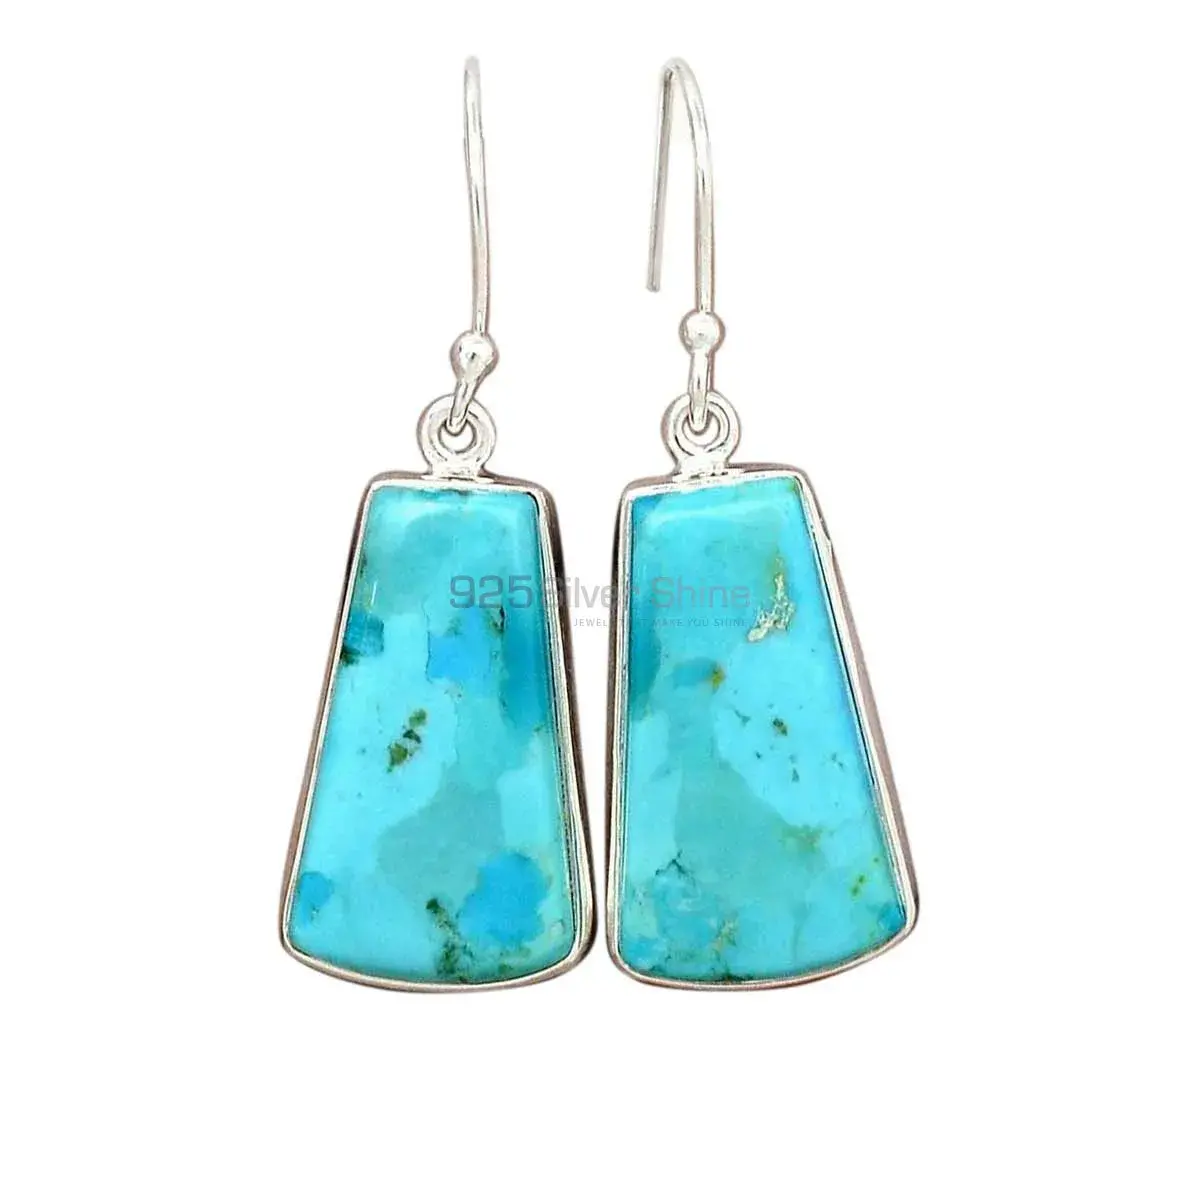 925 Sterling Silver Earrings In Natural Turquoise Gemstone 925SE2806